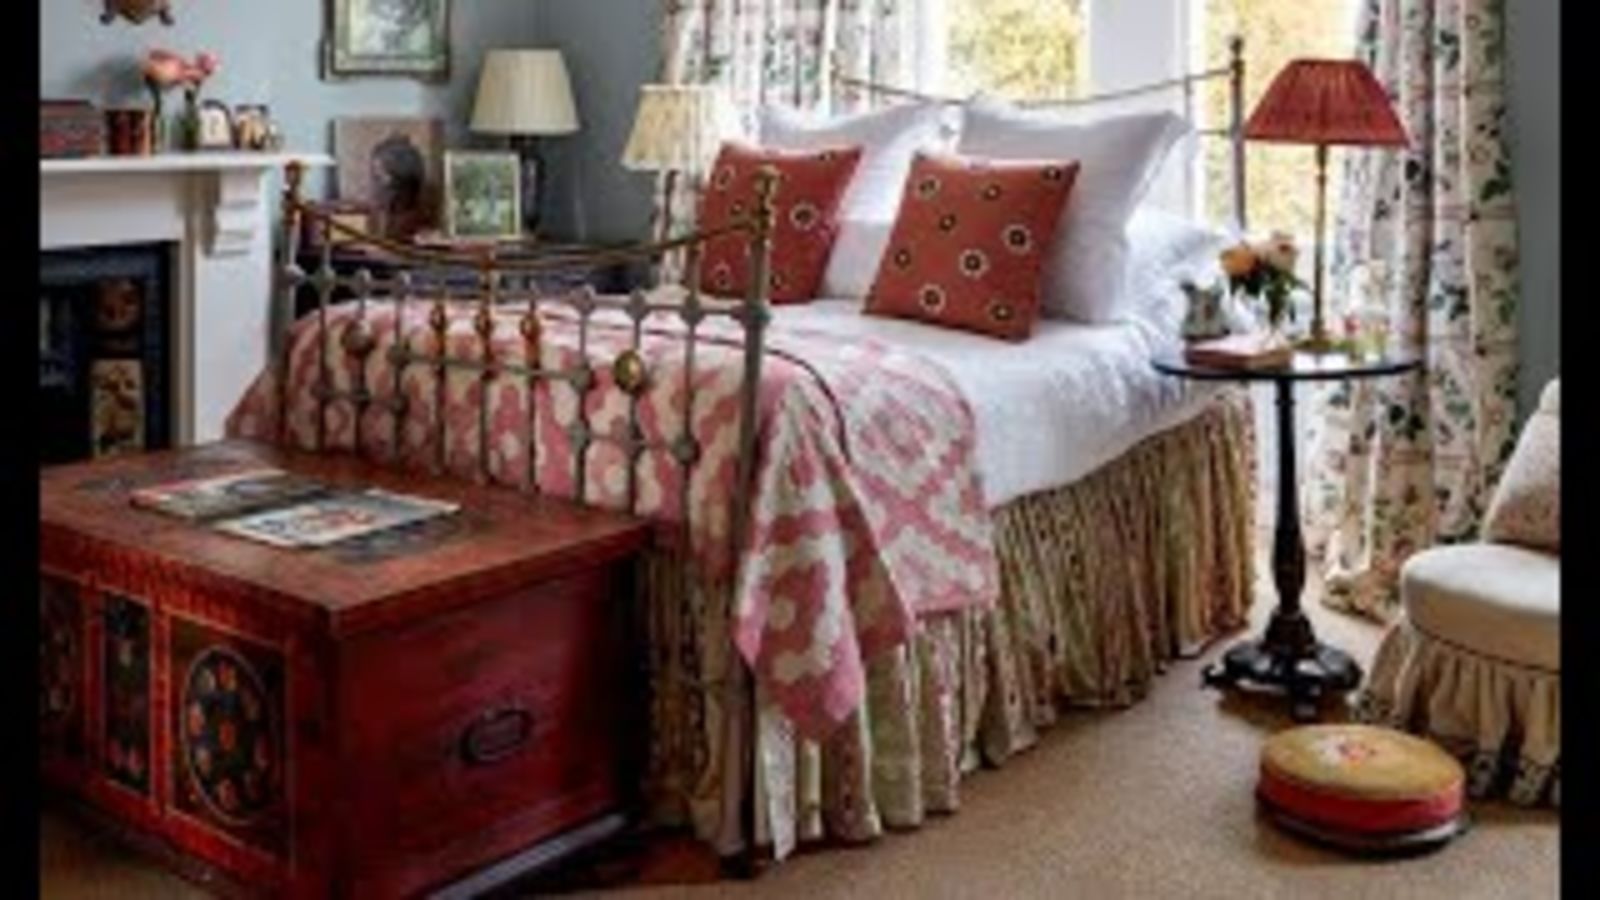 Emma Burns of Sybil Colefax & John Fowler on how to choose and style a bed | How To